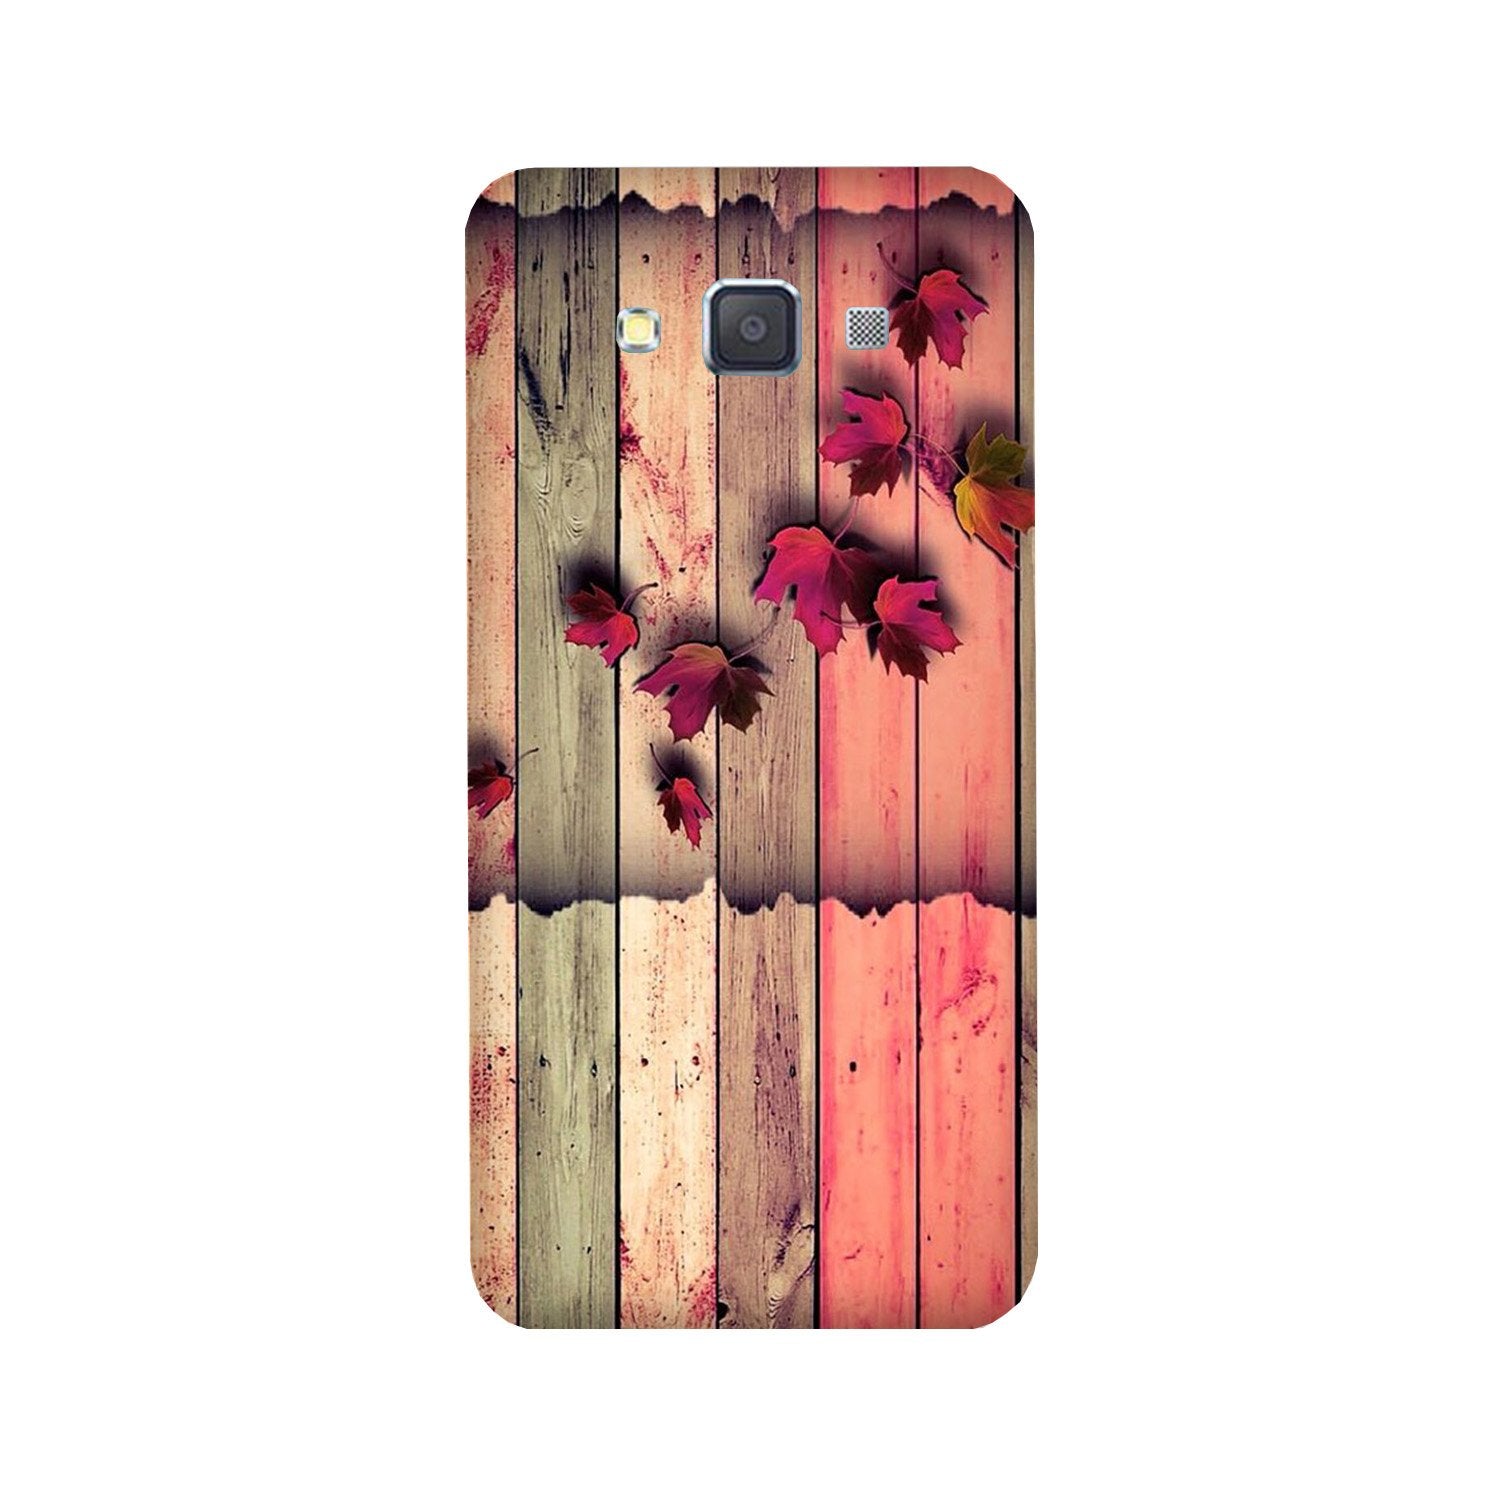 Wooden look2 Case for Galaxy Grand Prime